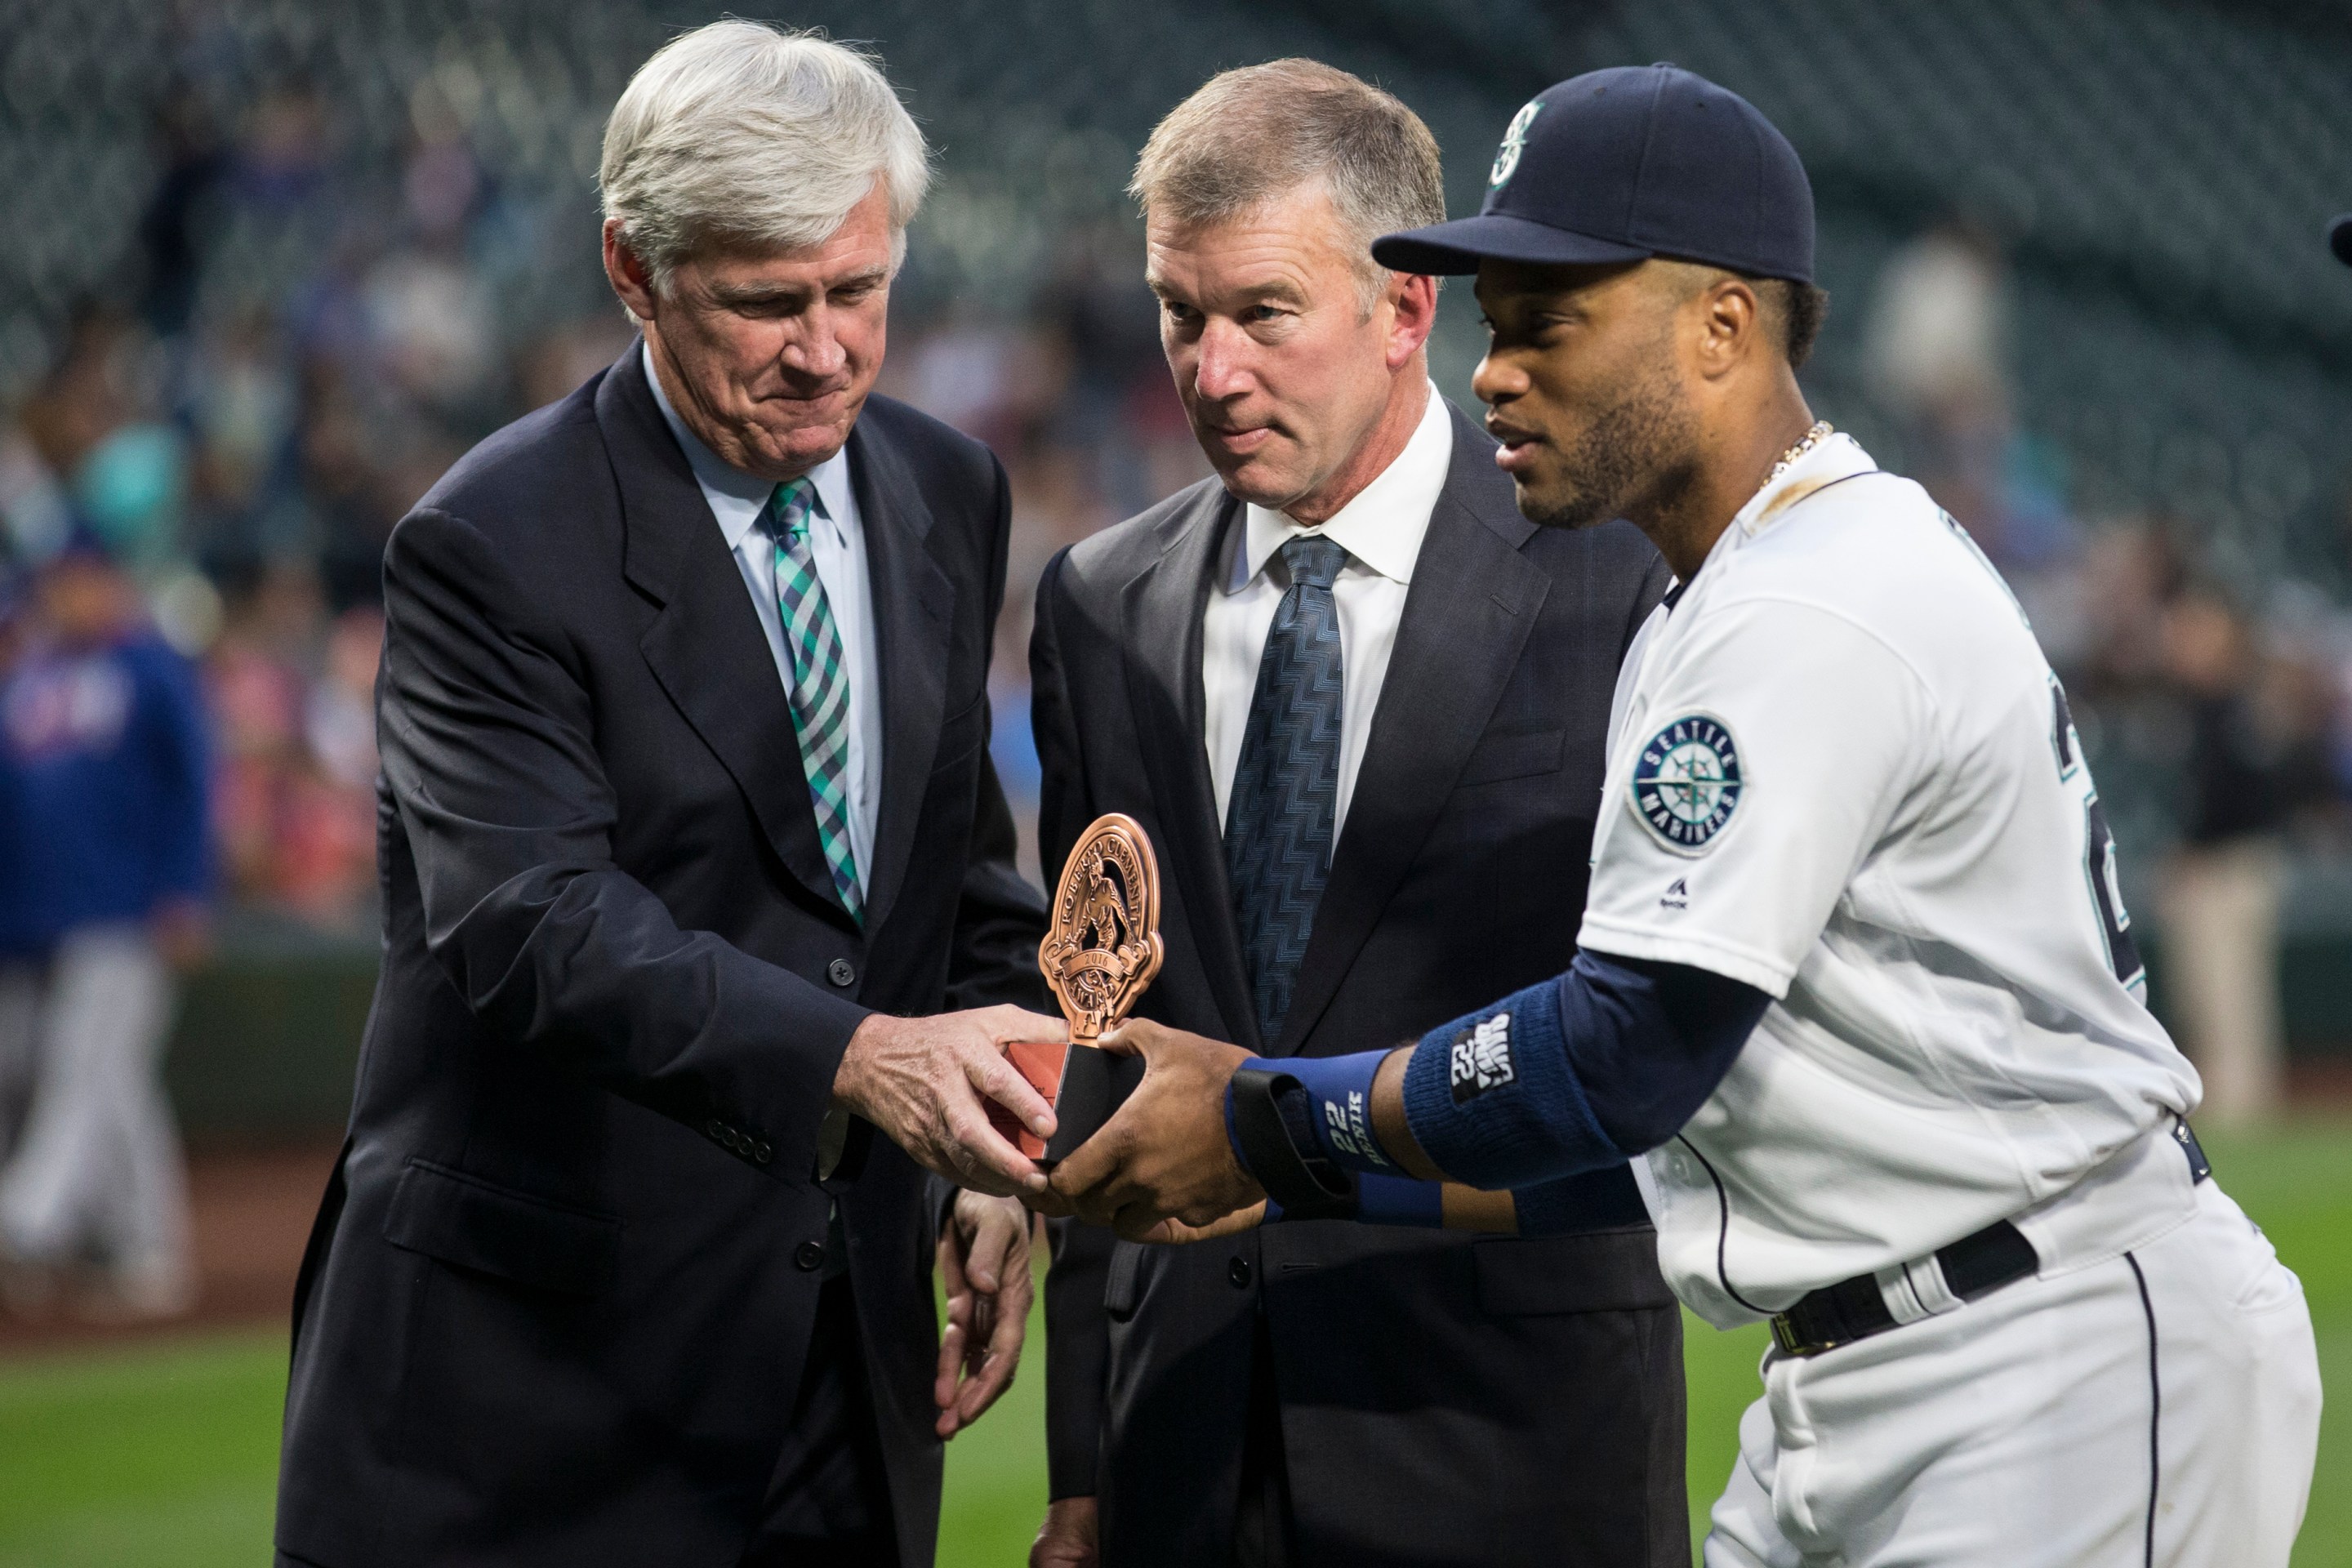 Former Mariners CEO Kevin Mather with owner John Stanton and Robinson Cano